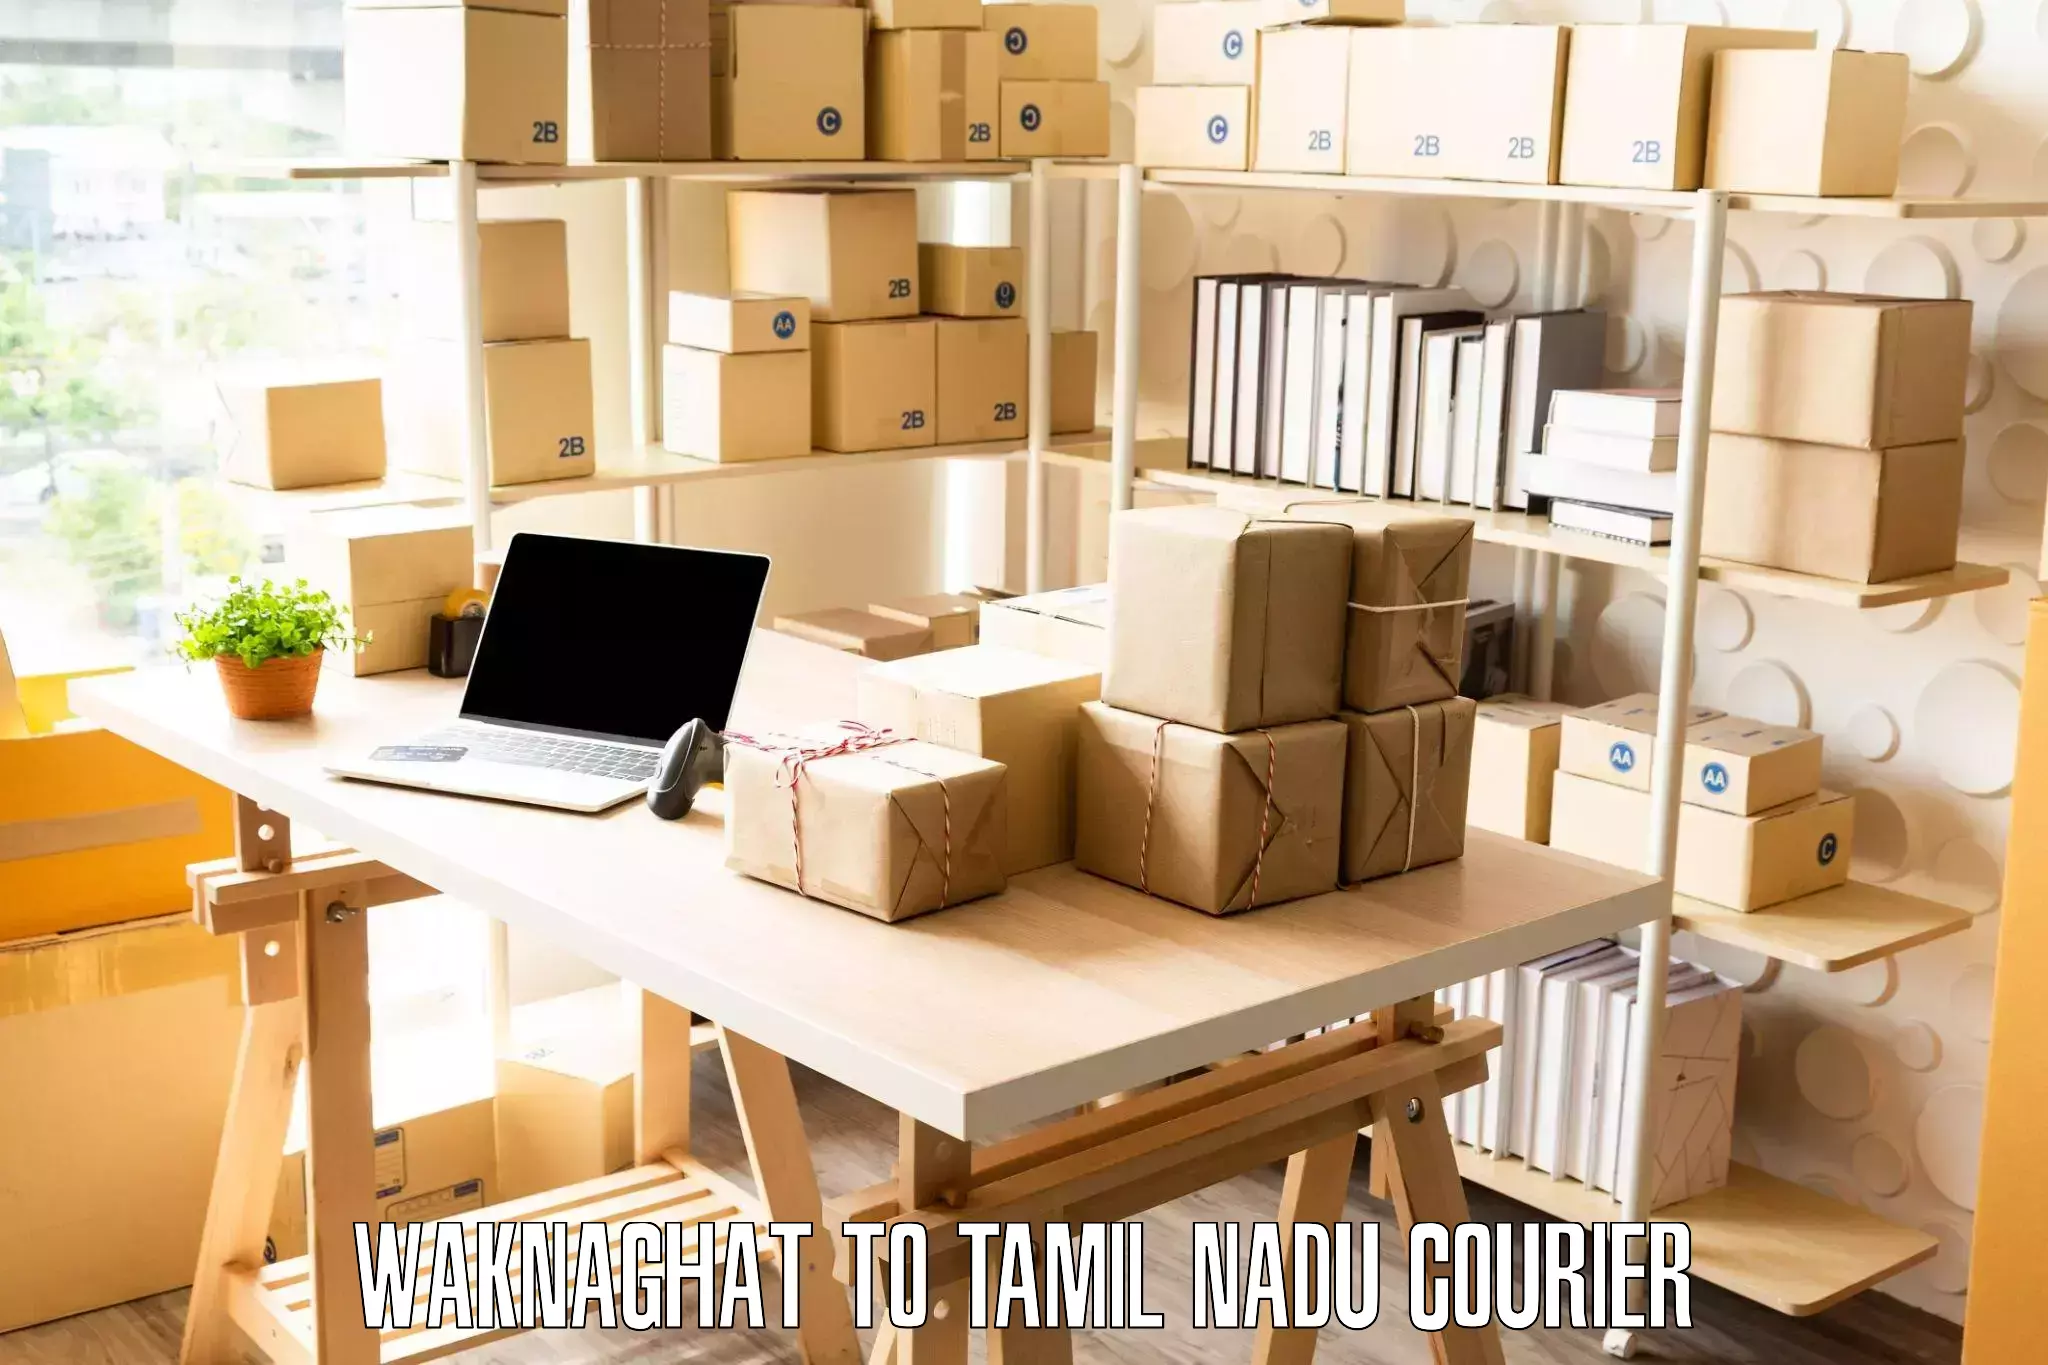 Furniture moving assistance Waknaghat to Ennore Port Chennai